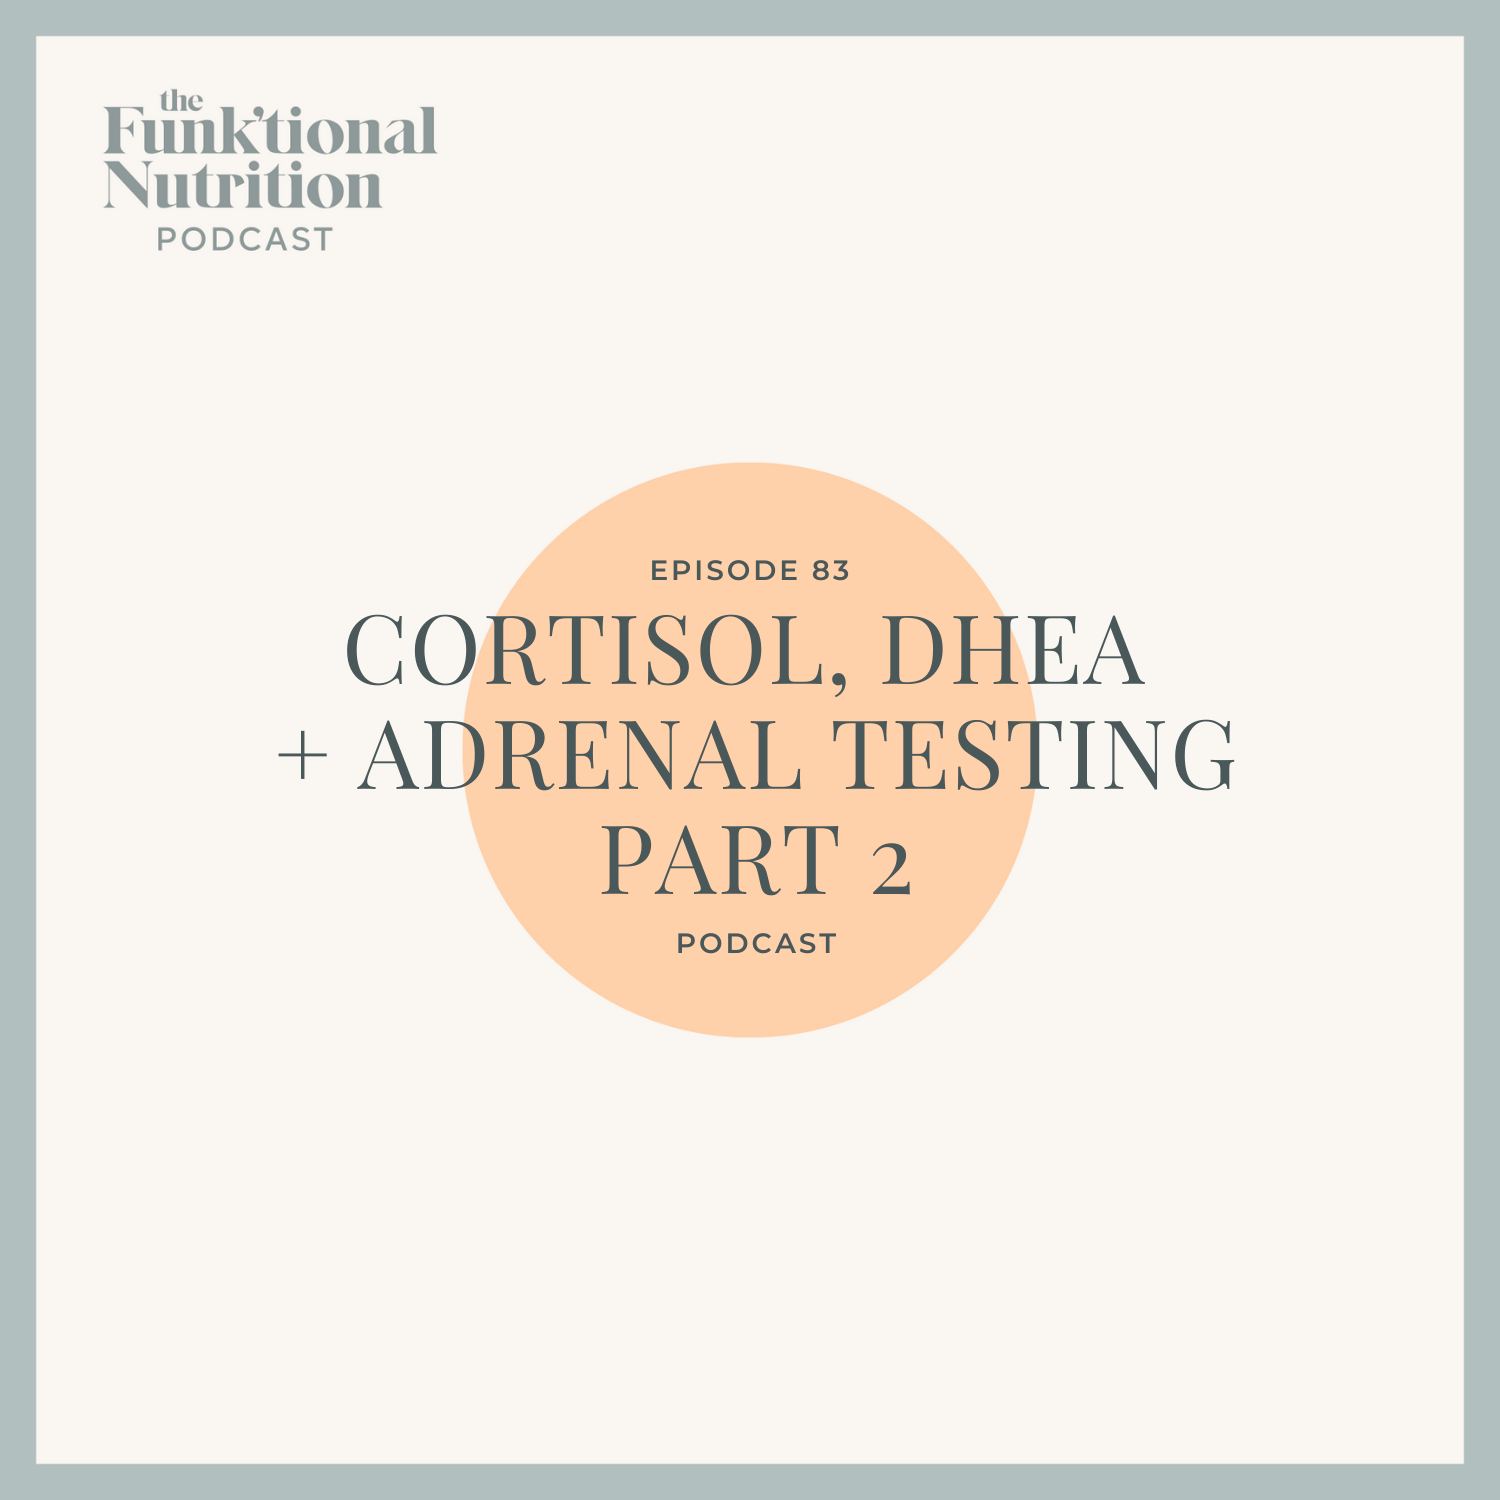 Episode-83-Cortisol-DHEA-Adrenal-Testing-Part-2-The-Funk_tional-Nutrition-Podcast.png